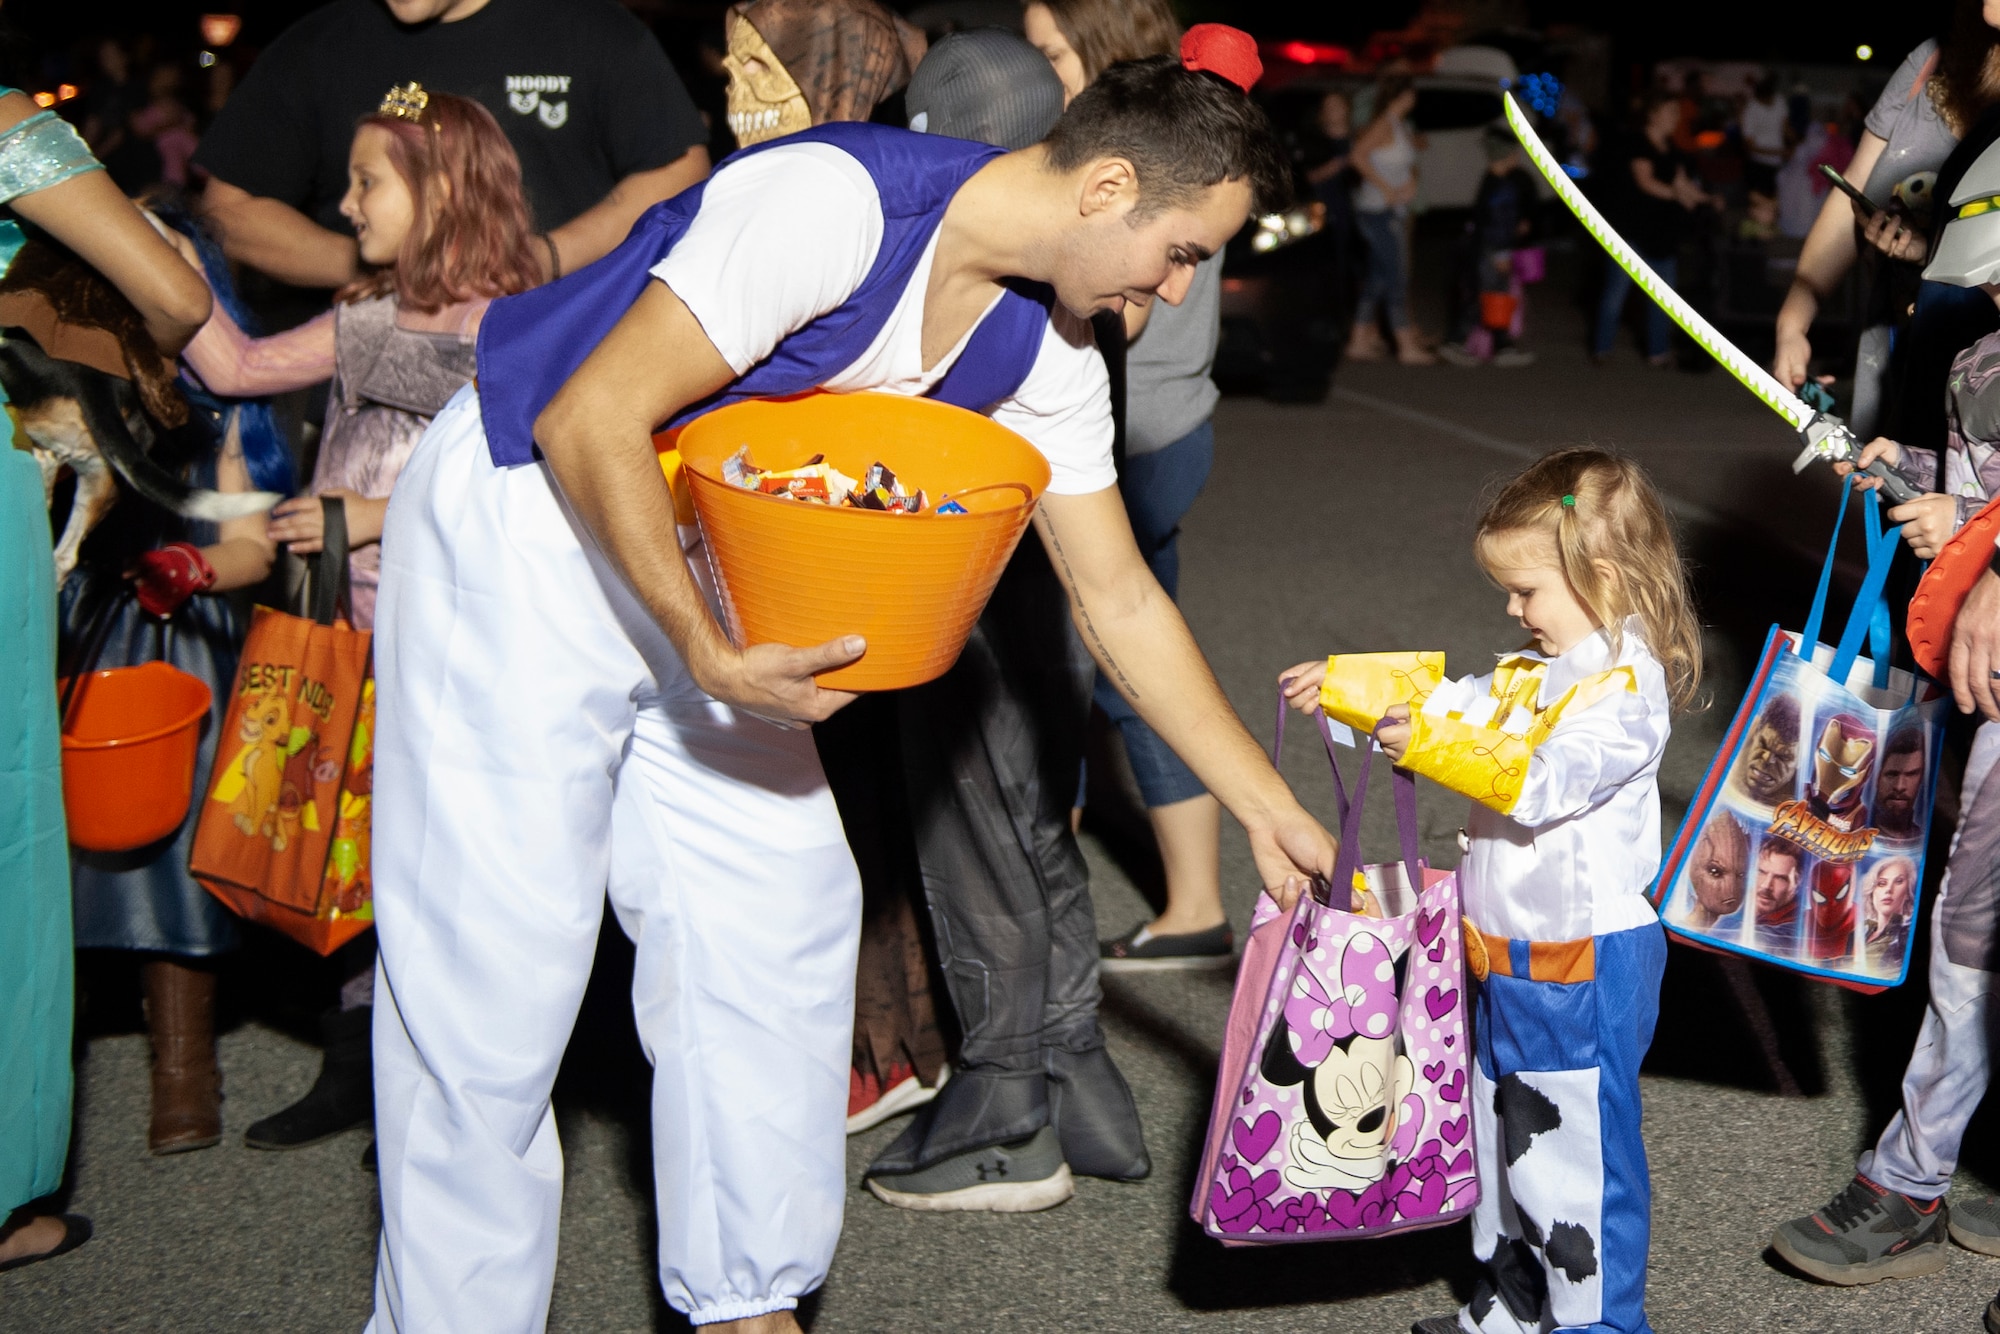 A Trunk or Treat volunteer hands out candy Oct. 25, 2019, at Moody Air Force Base, Ga. Participants, dressed in costumes, received candy from volunteers, who decorated their trunks. (U.S. Air Force photo by Airman 1st Class Jasmine M. Barnes)